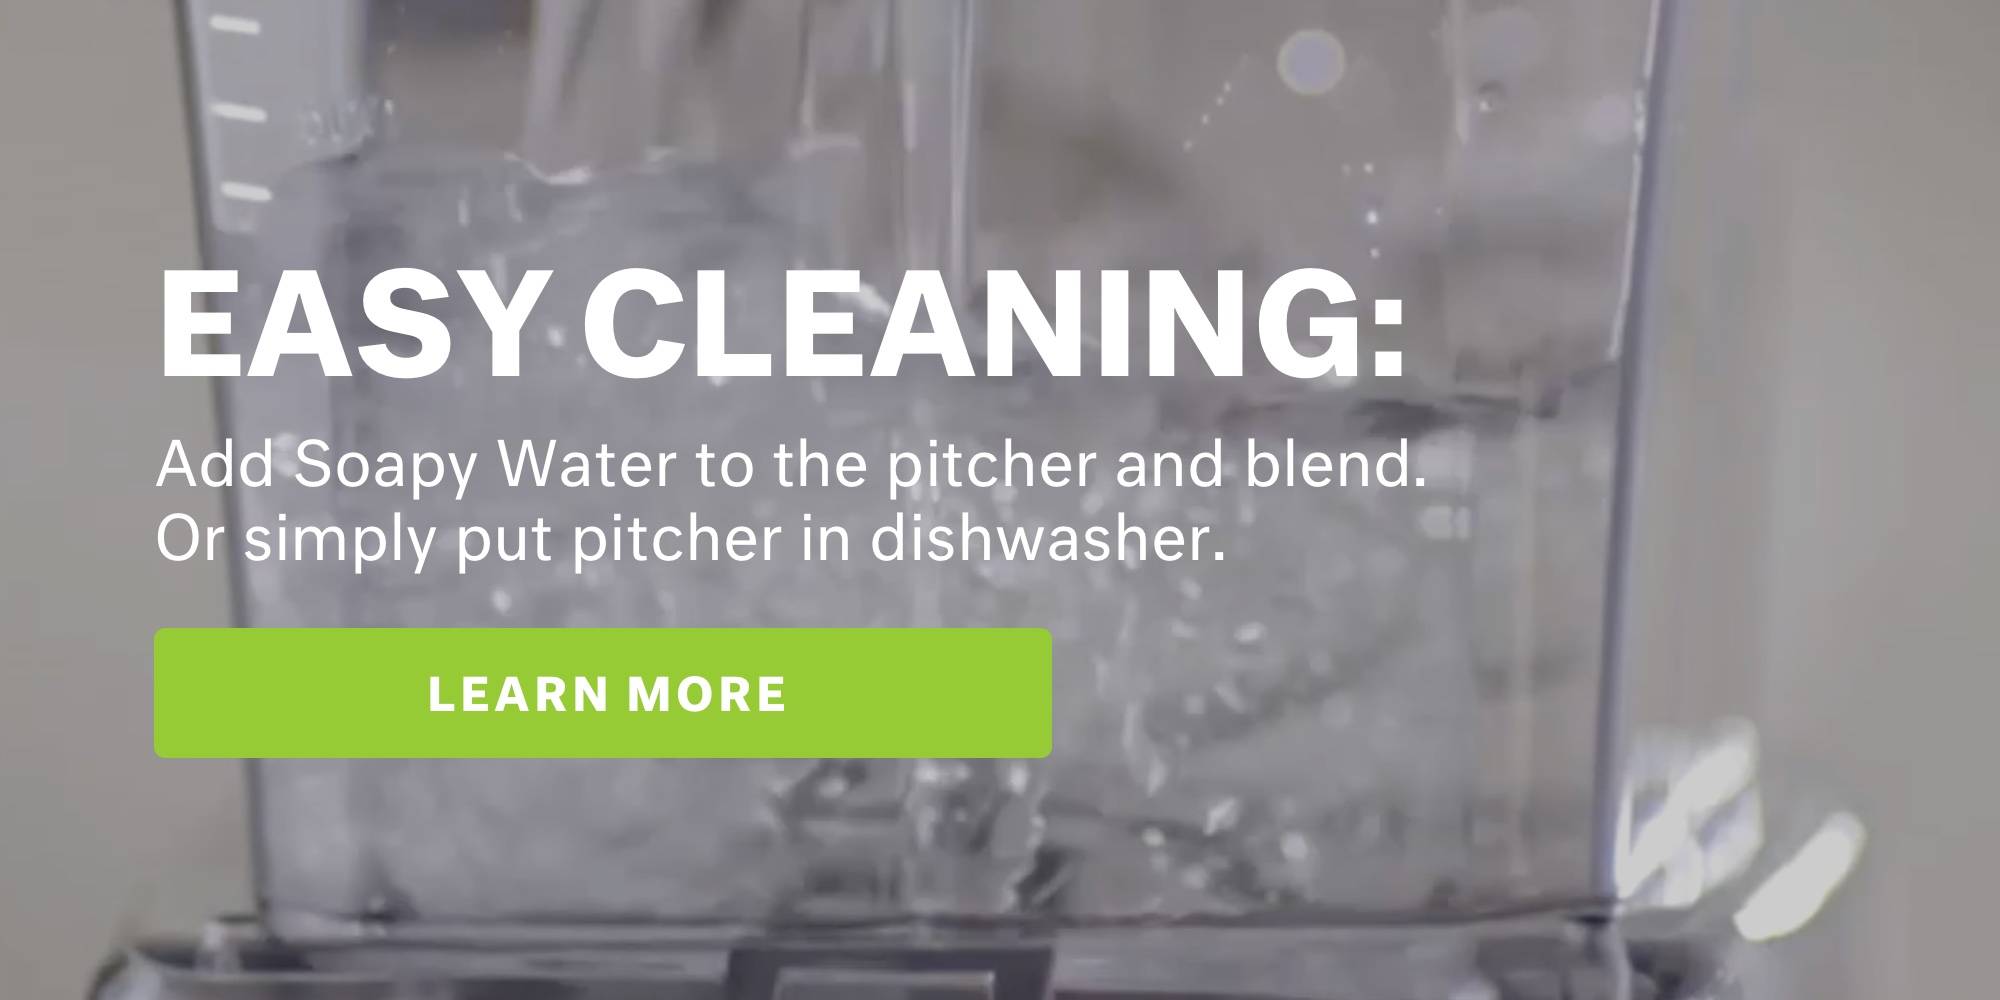 Easy cleaning. Add soapy water to the pitcher and blend. Or simply put pitcher in dishwasher. learn more.